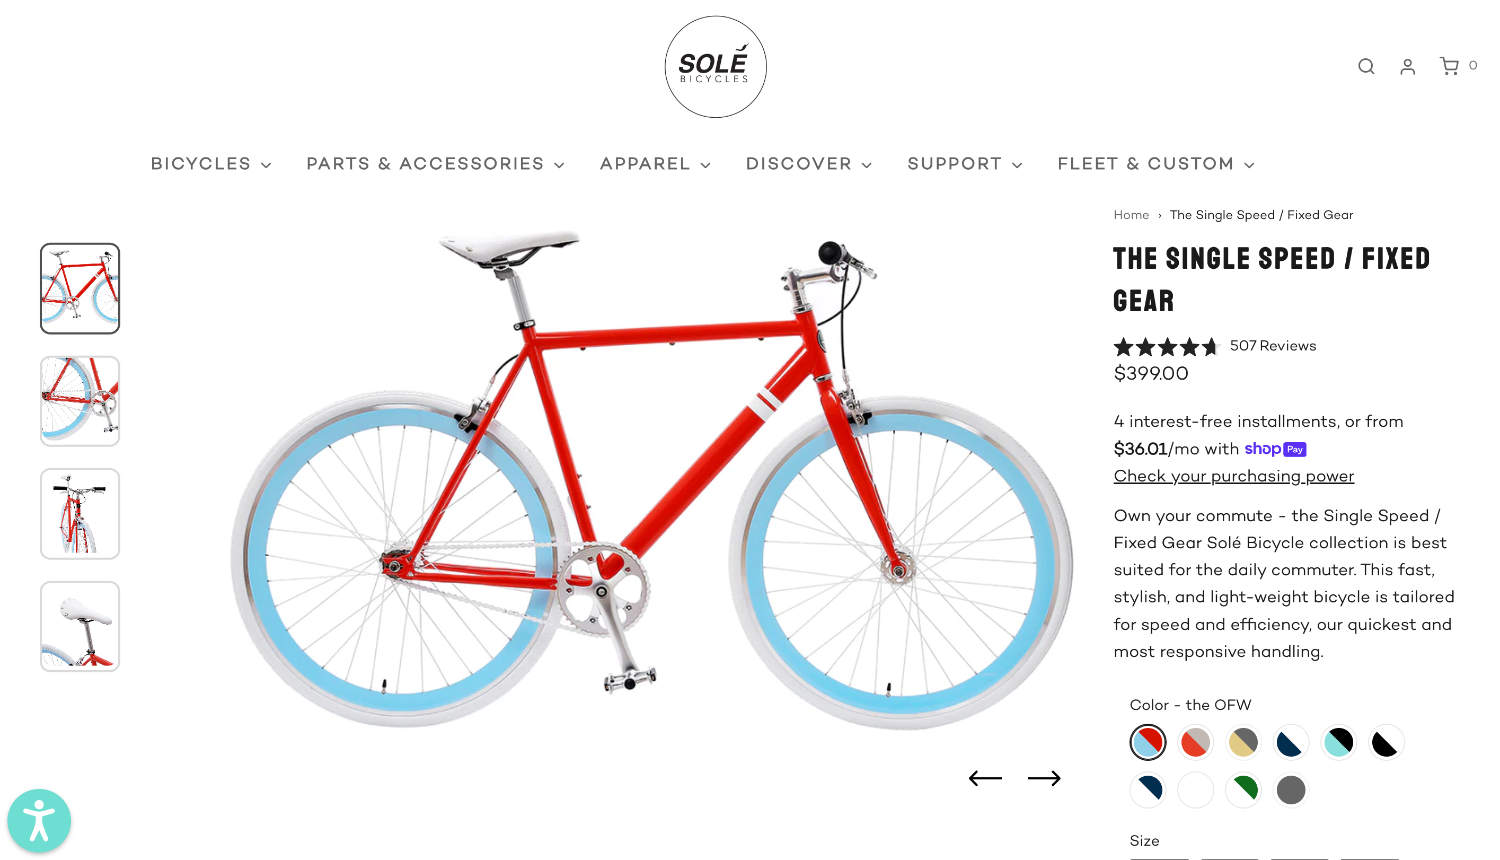 An ecommerce webpage for Sole bicycles